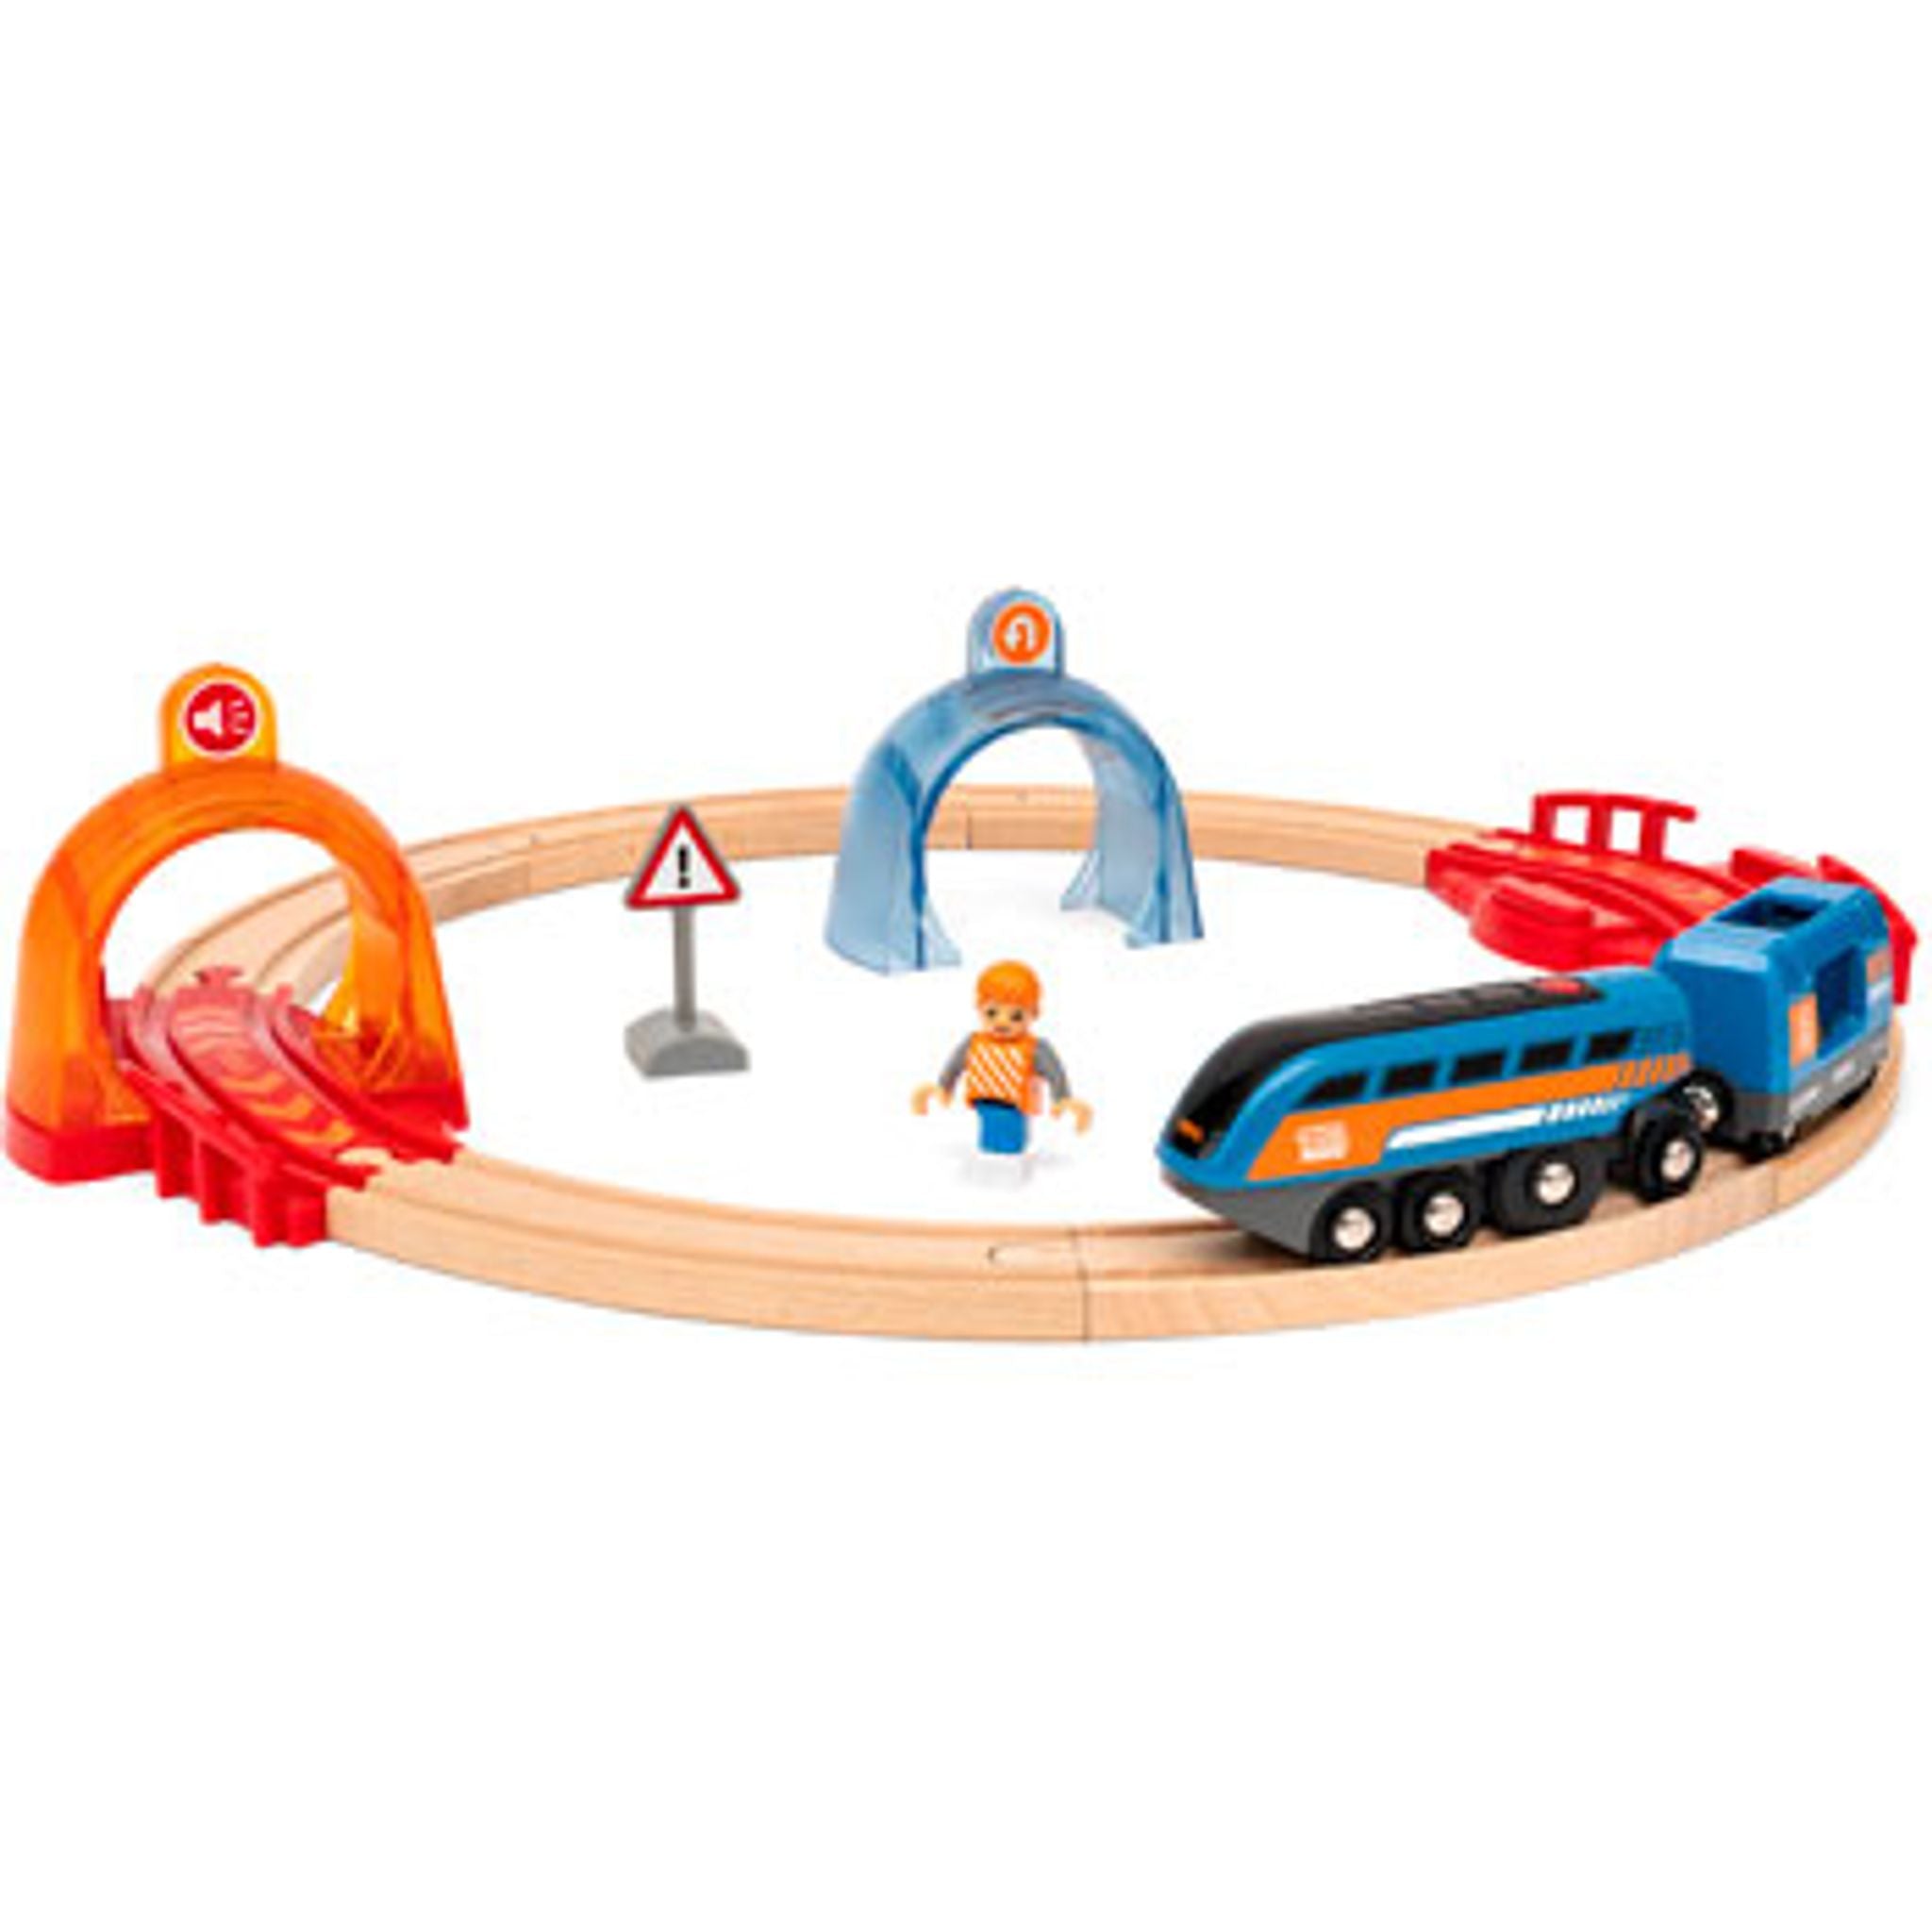 BRIO - Action Tunnel Circle Set - Toybox Tales